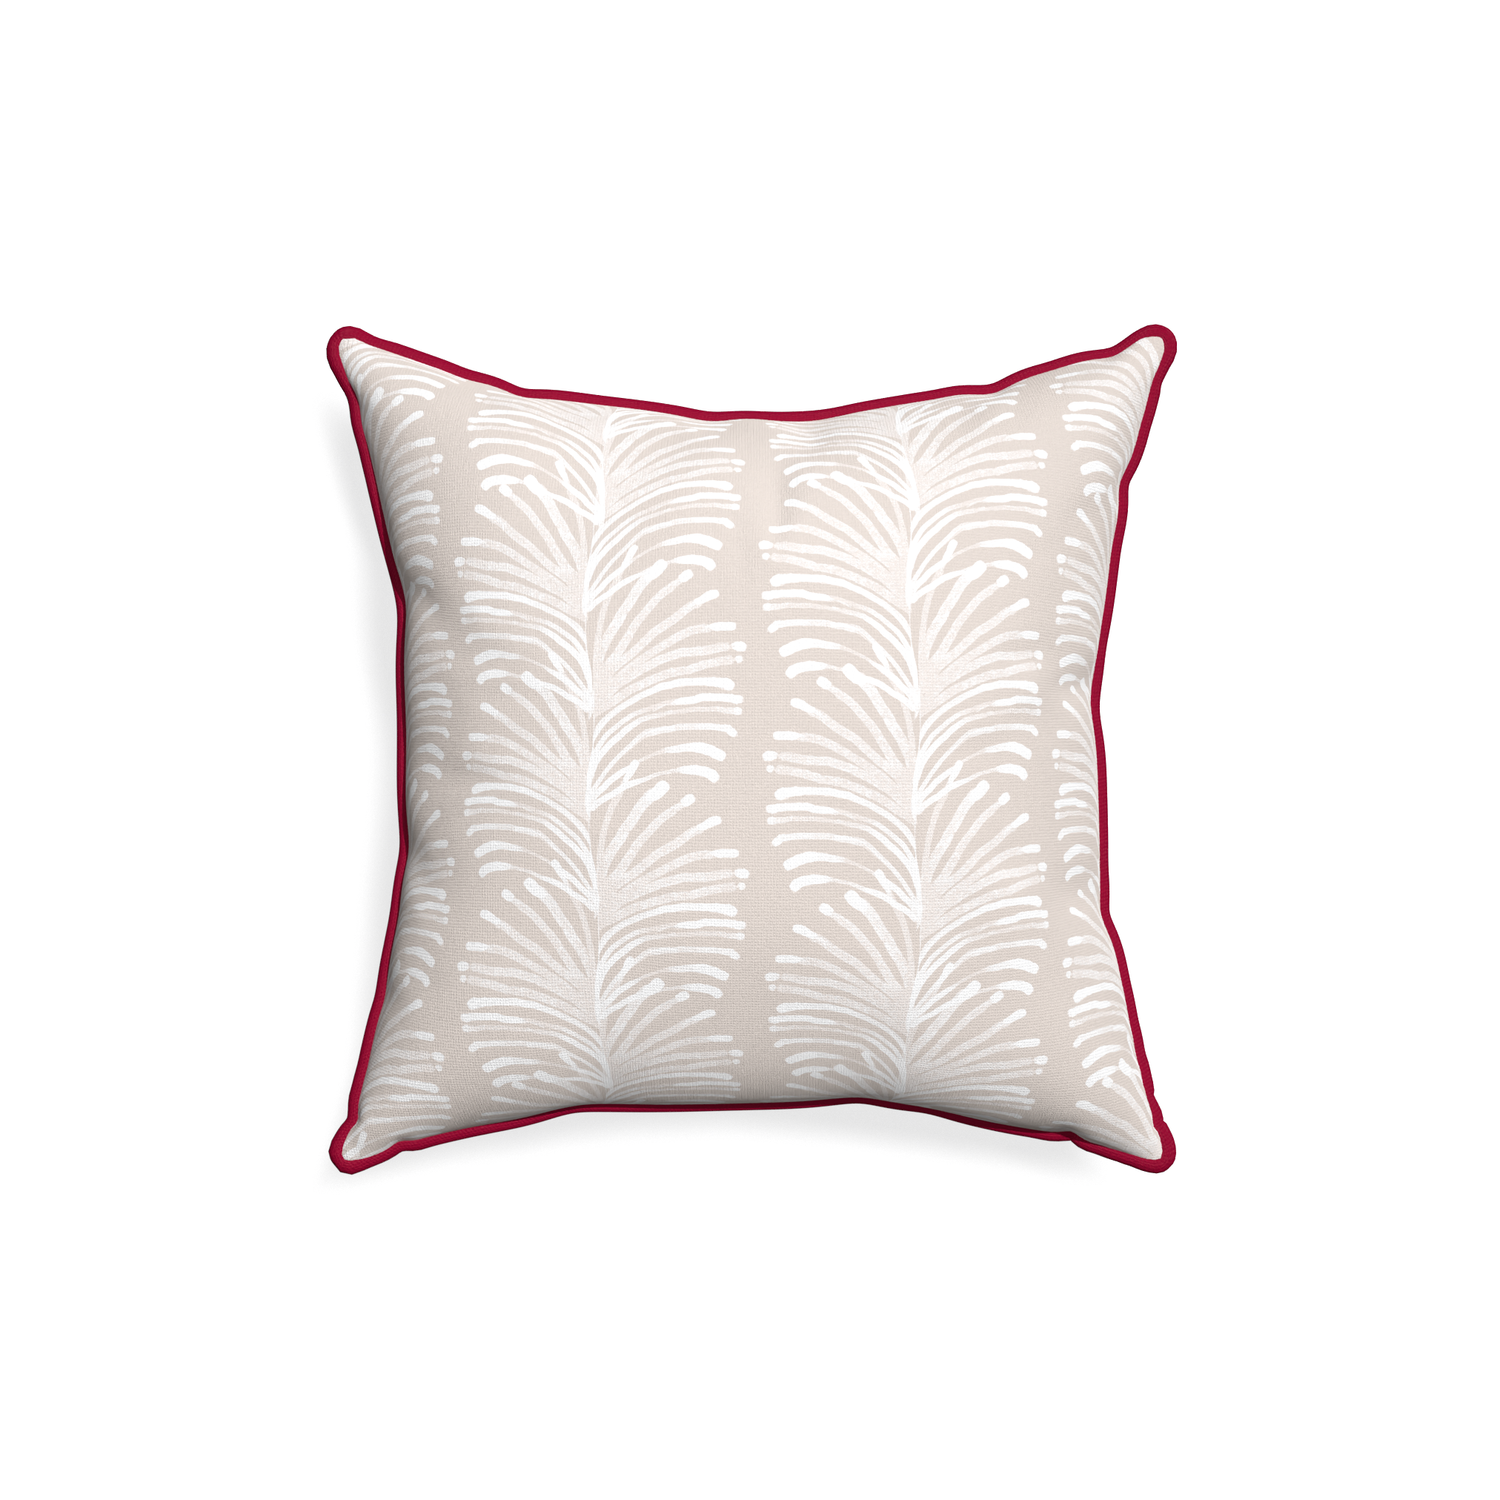 18-square emma sand custom pillow with raspberry piping on white background